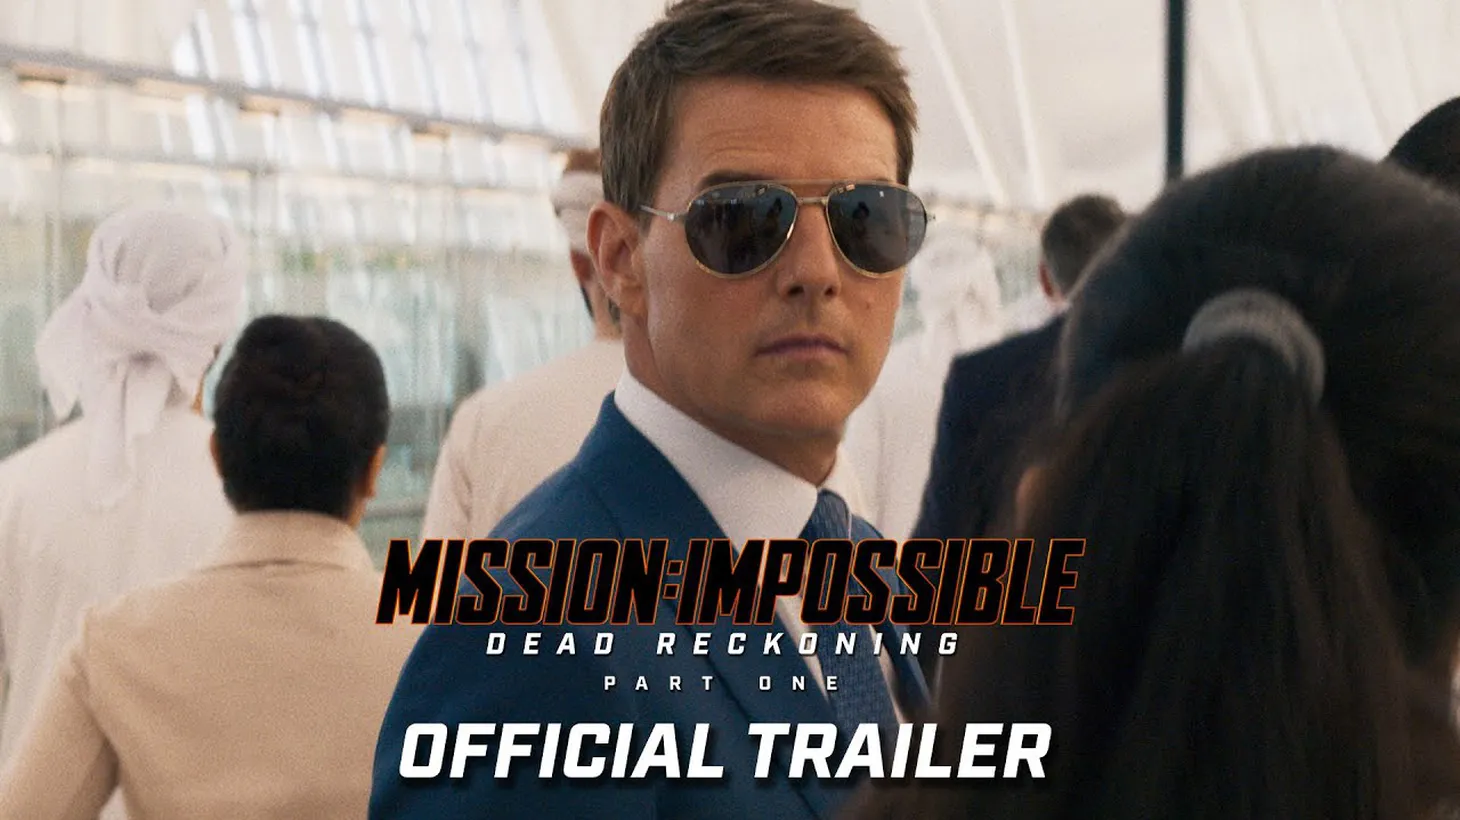 In the seventh installment of the “Mission: Impossible” franchise, Ethan Hunt (Tom Cruise) leads a secret U.S. spy team that fights artificial intelligence.